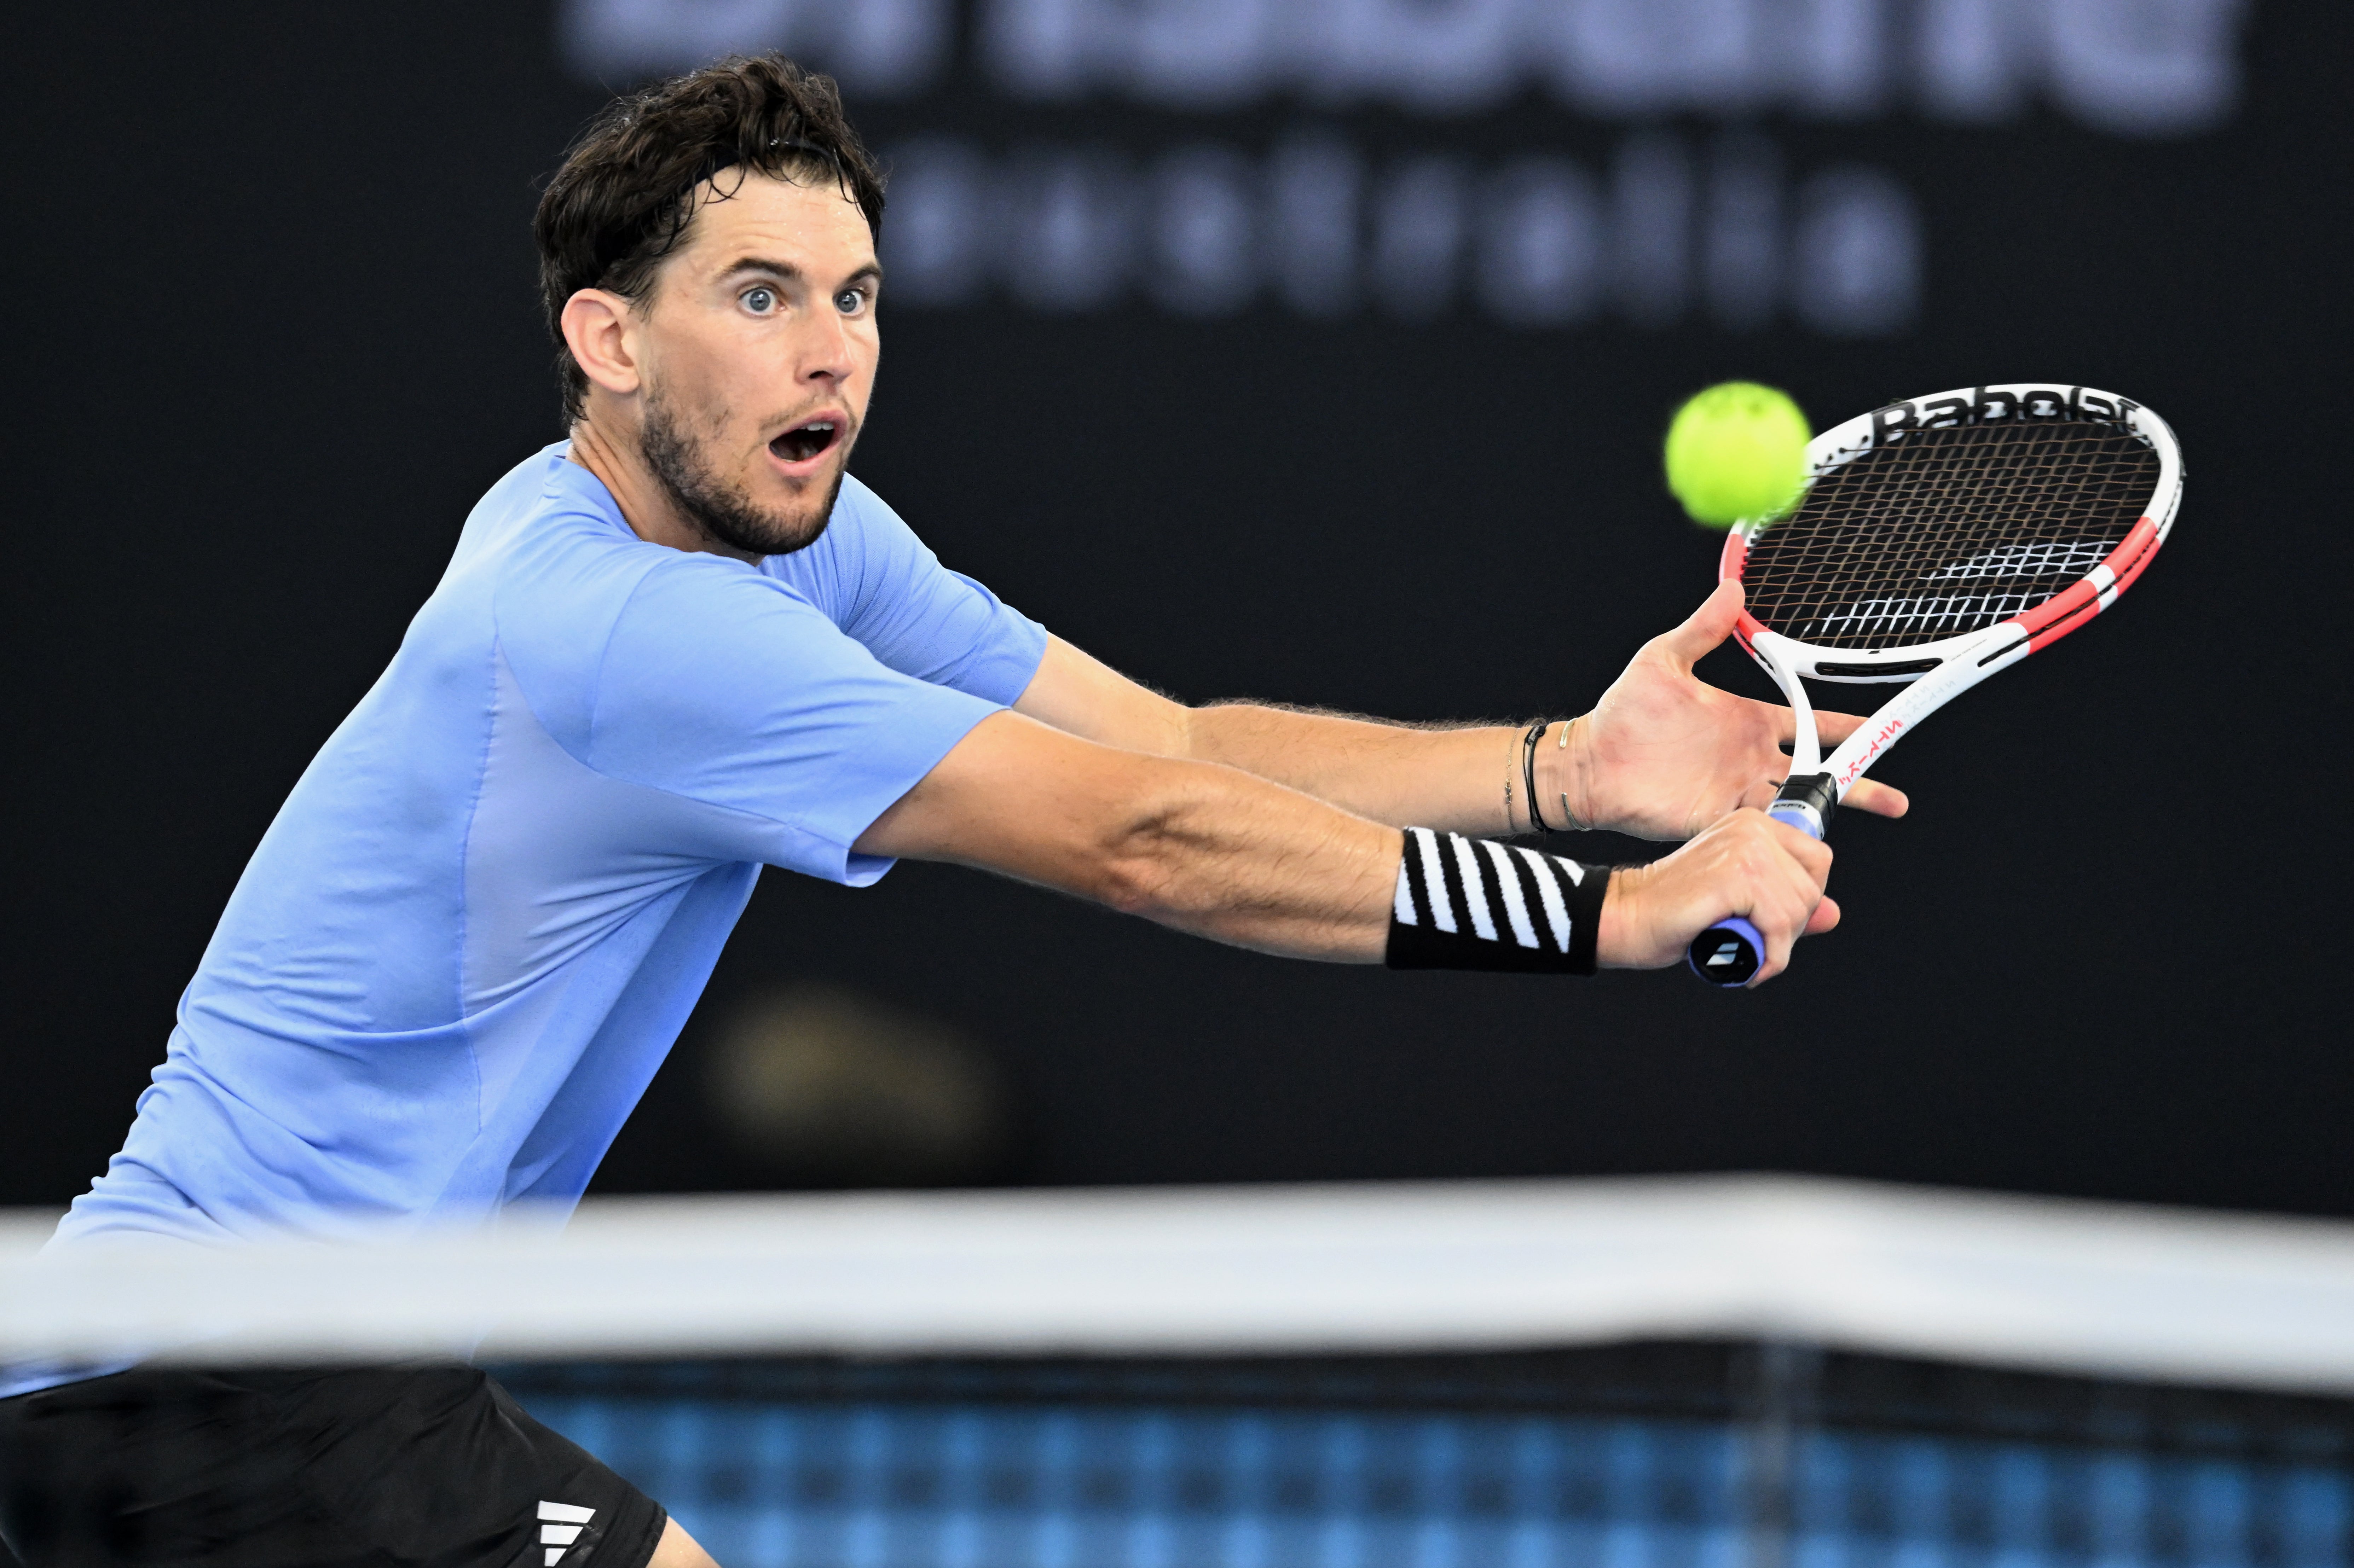 Dominic Thiem saw his match interrupted by a snake in Brisbane